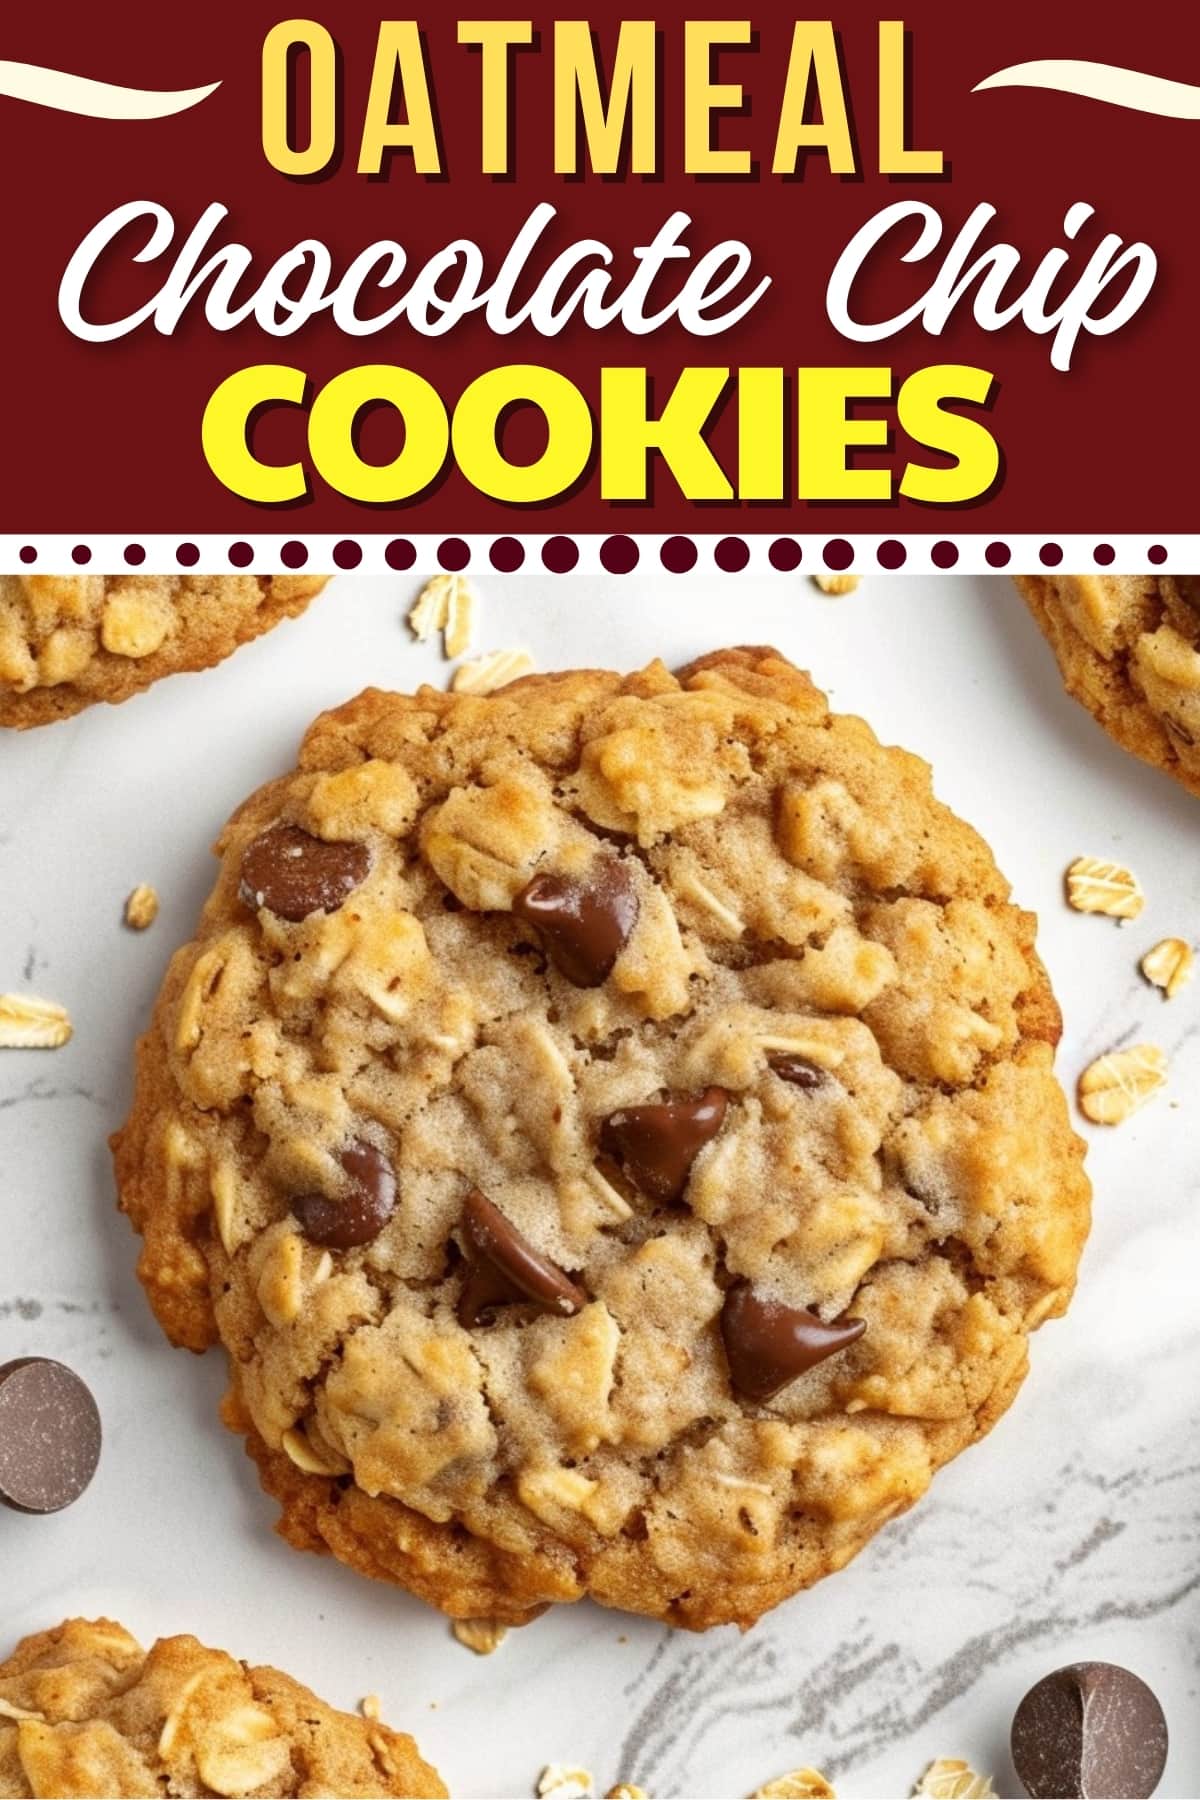 Oatmeal Chocolate Chip Cookies (Chewy Recipe) - Insanely Good